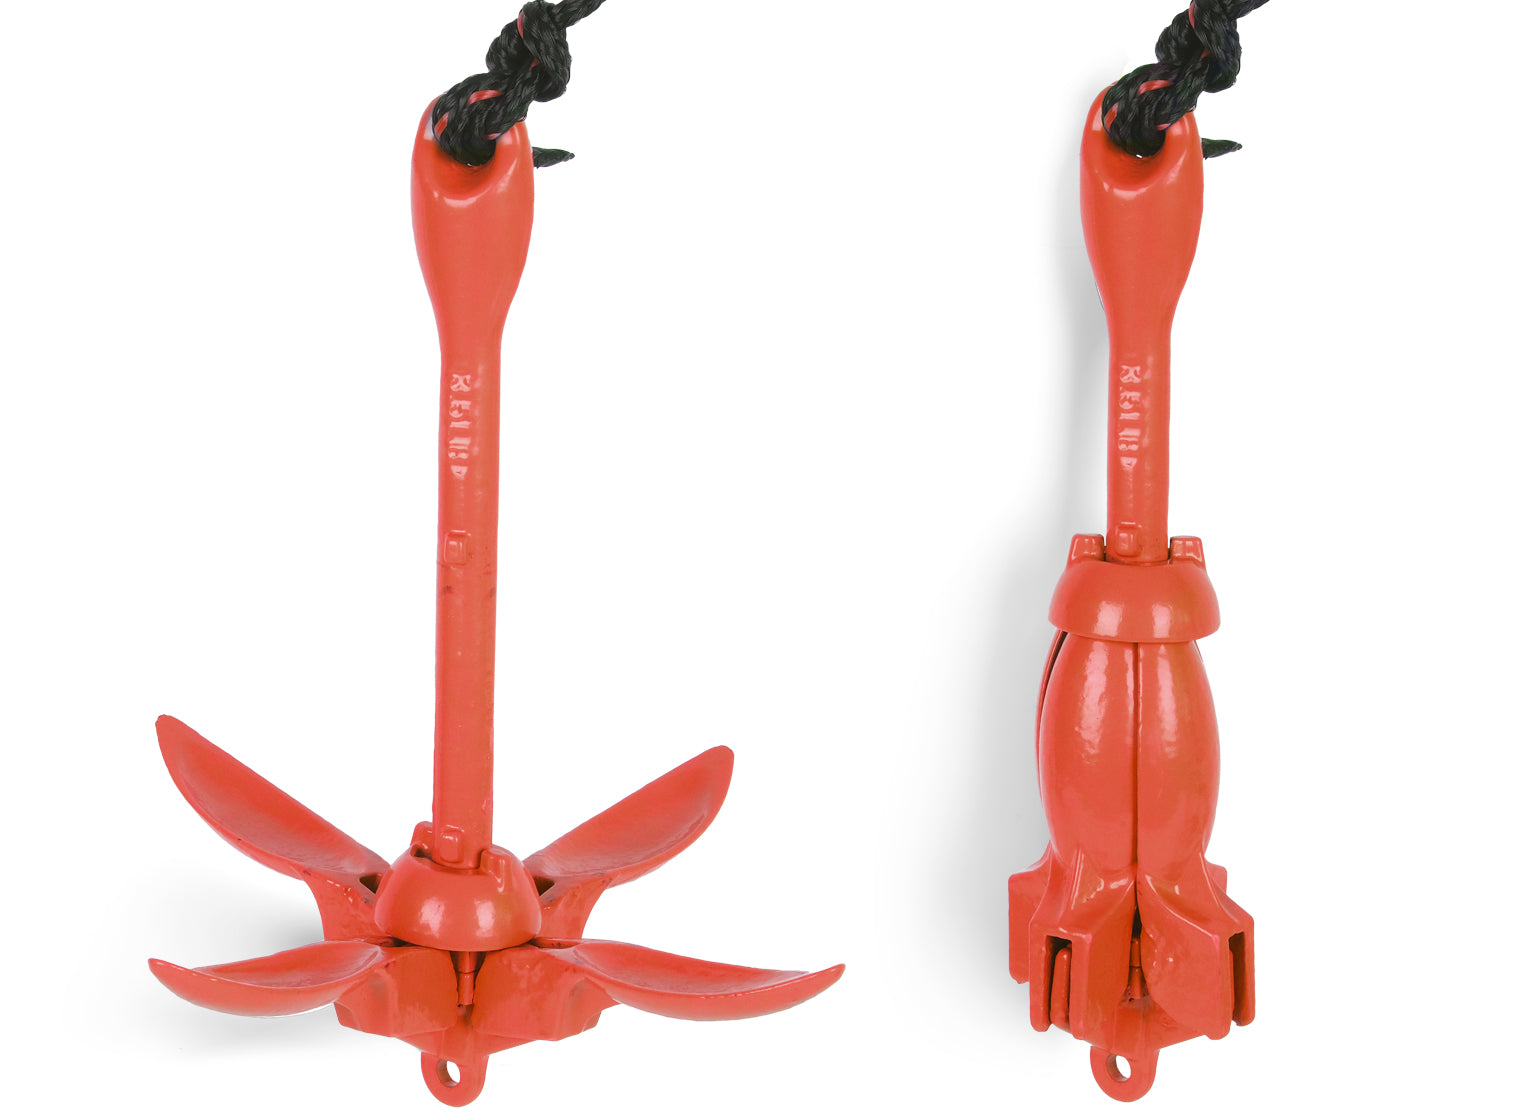 NIXY Paddleboard & Kayak Anchor, 3.5 lbs - Folding Grapnel Anchor Kit with 40ft Rope and Buoy. Portable and Compact Anchor Kit Great for Kayaks